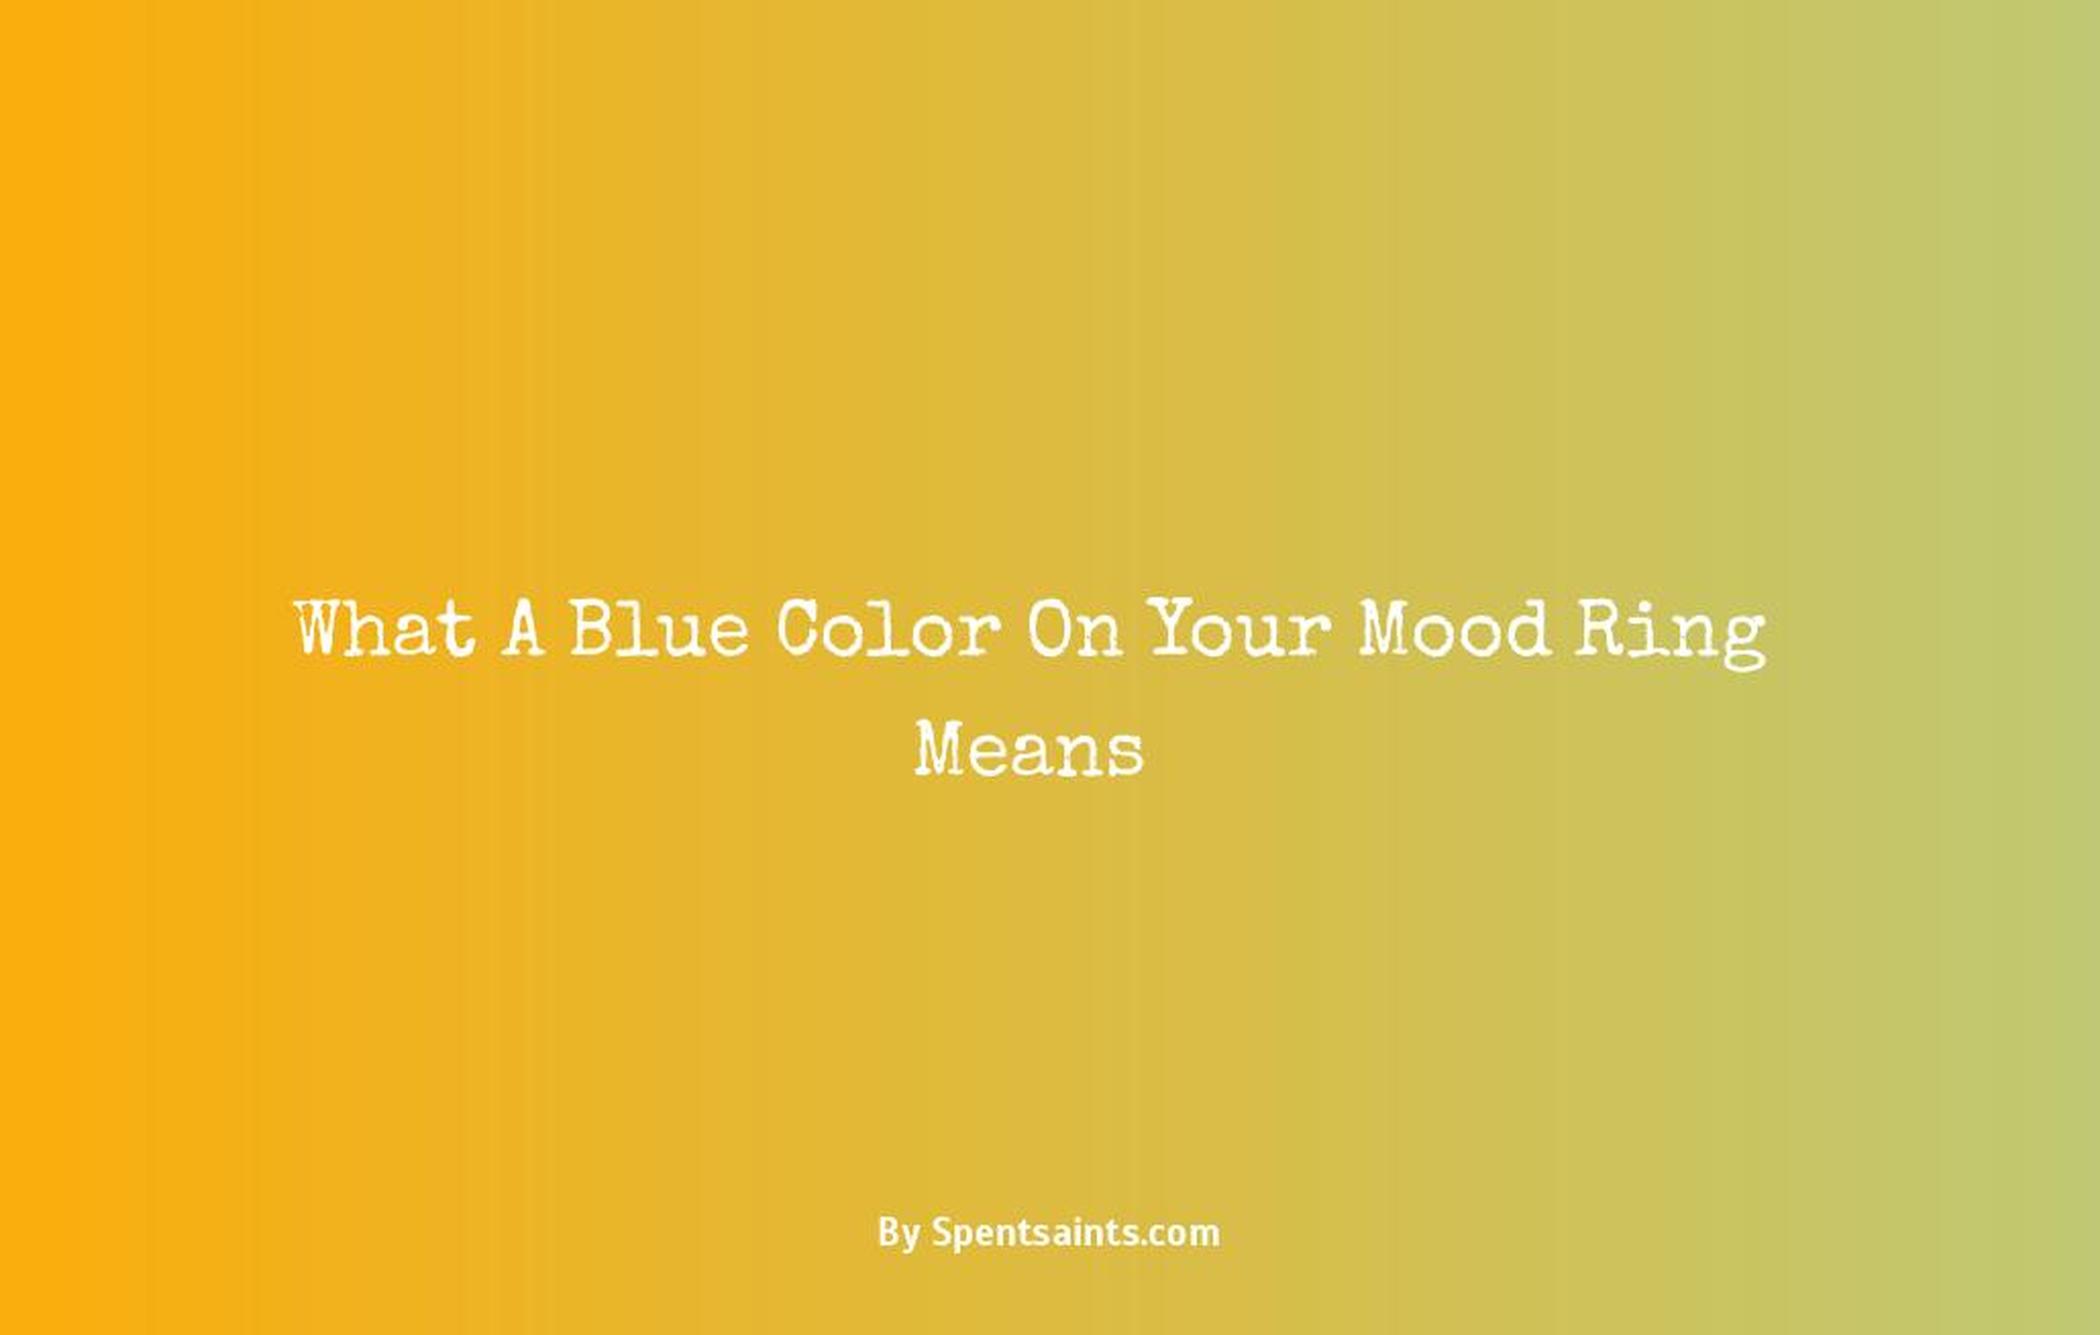 blue on a mood ring mean